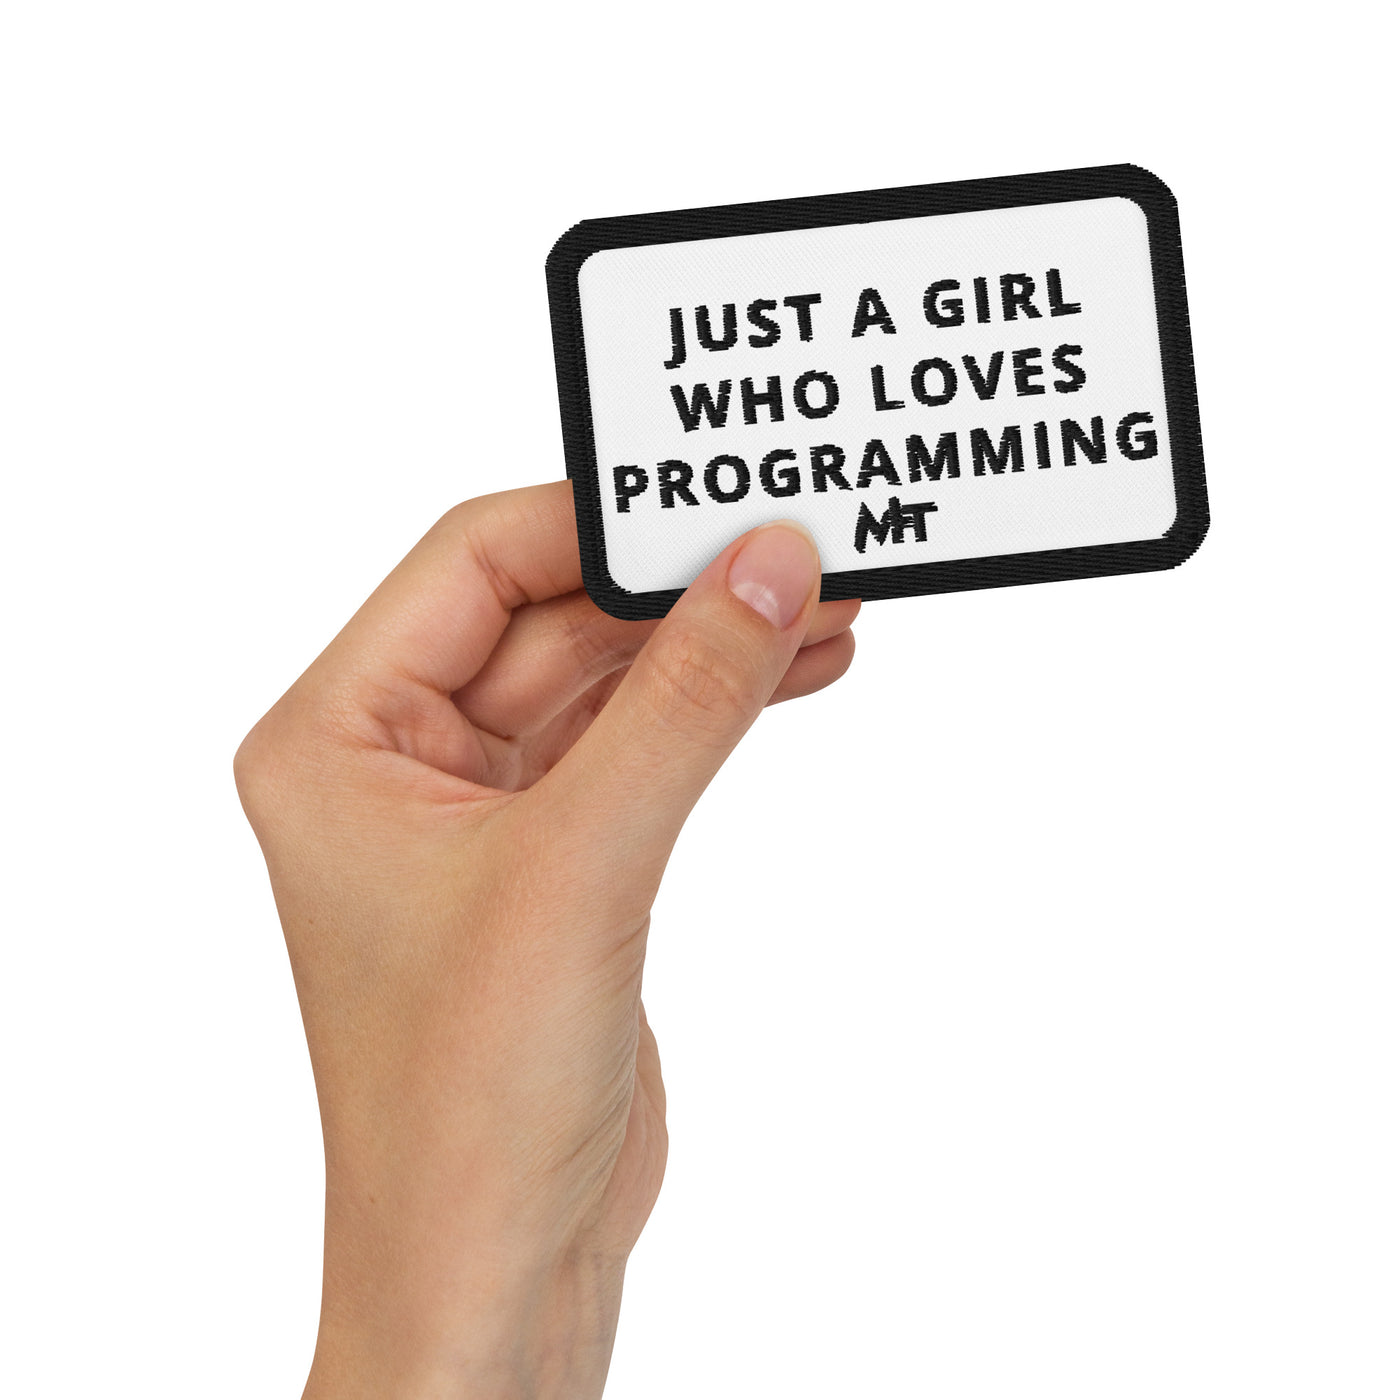 Just a girl who loves programming - Embroidered patches